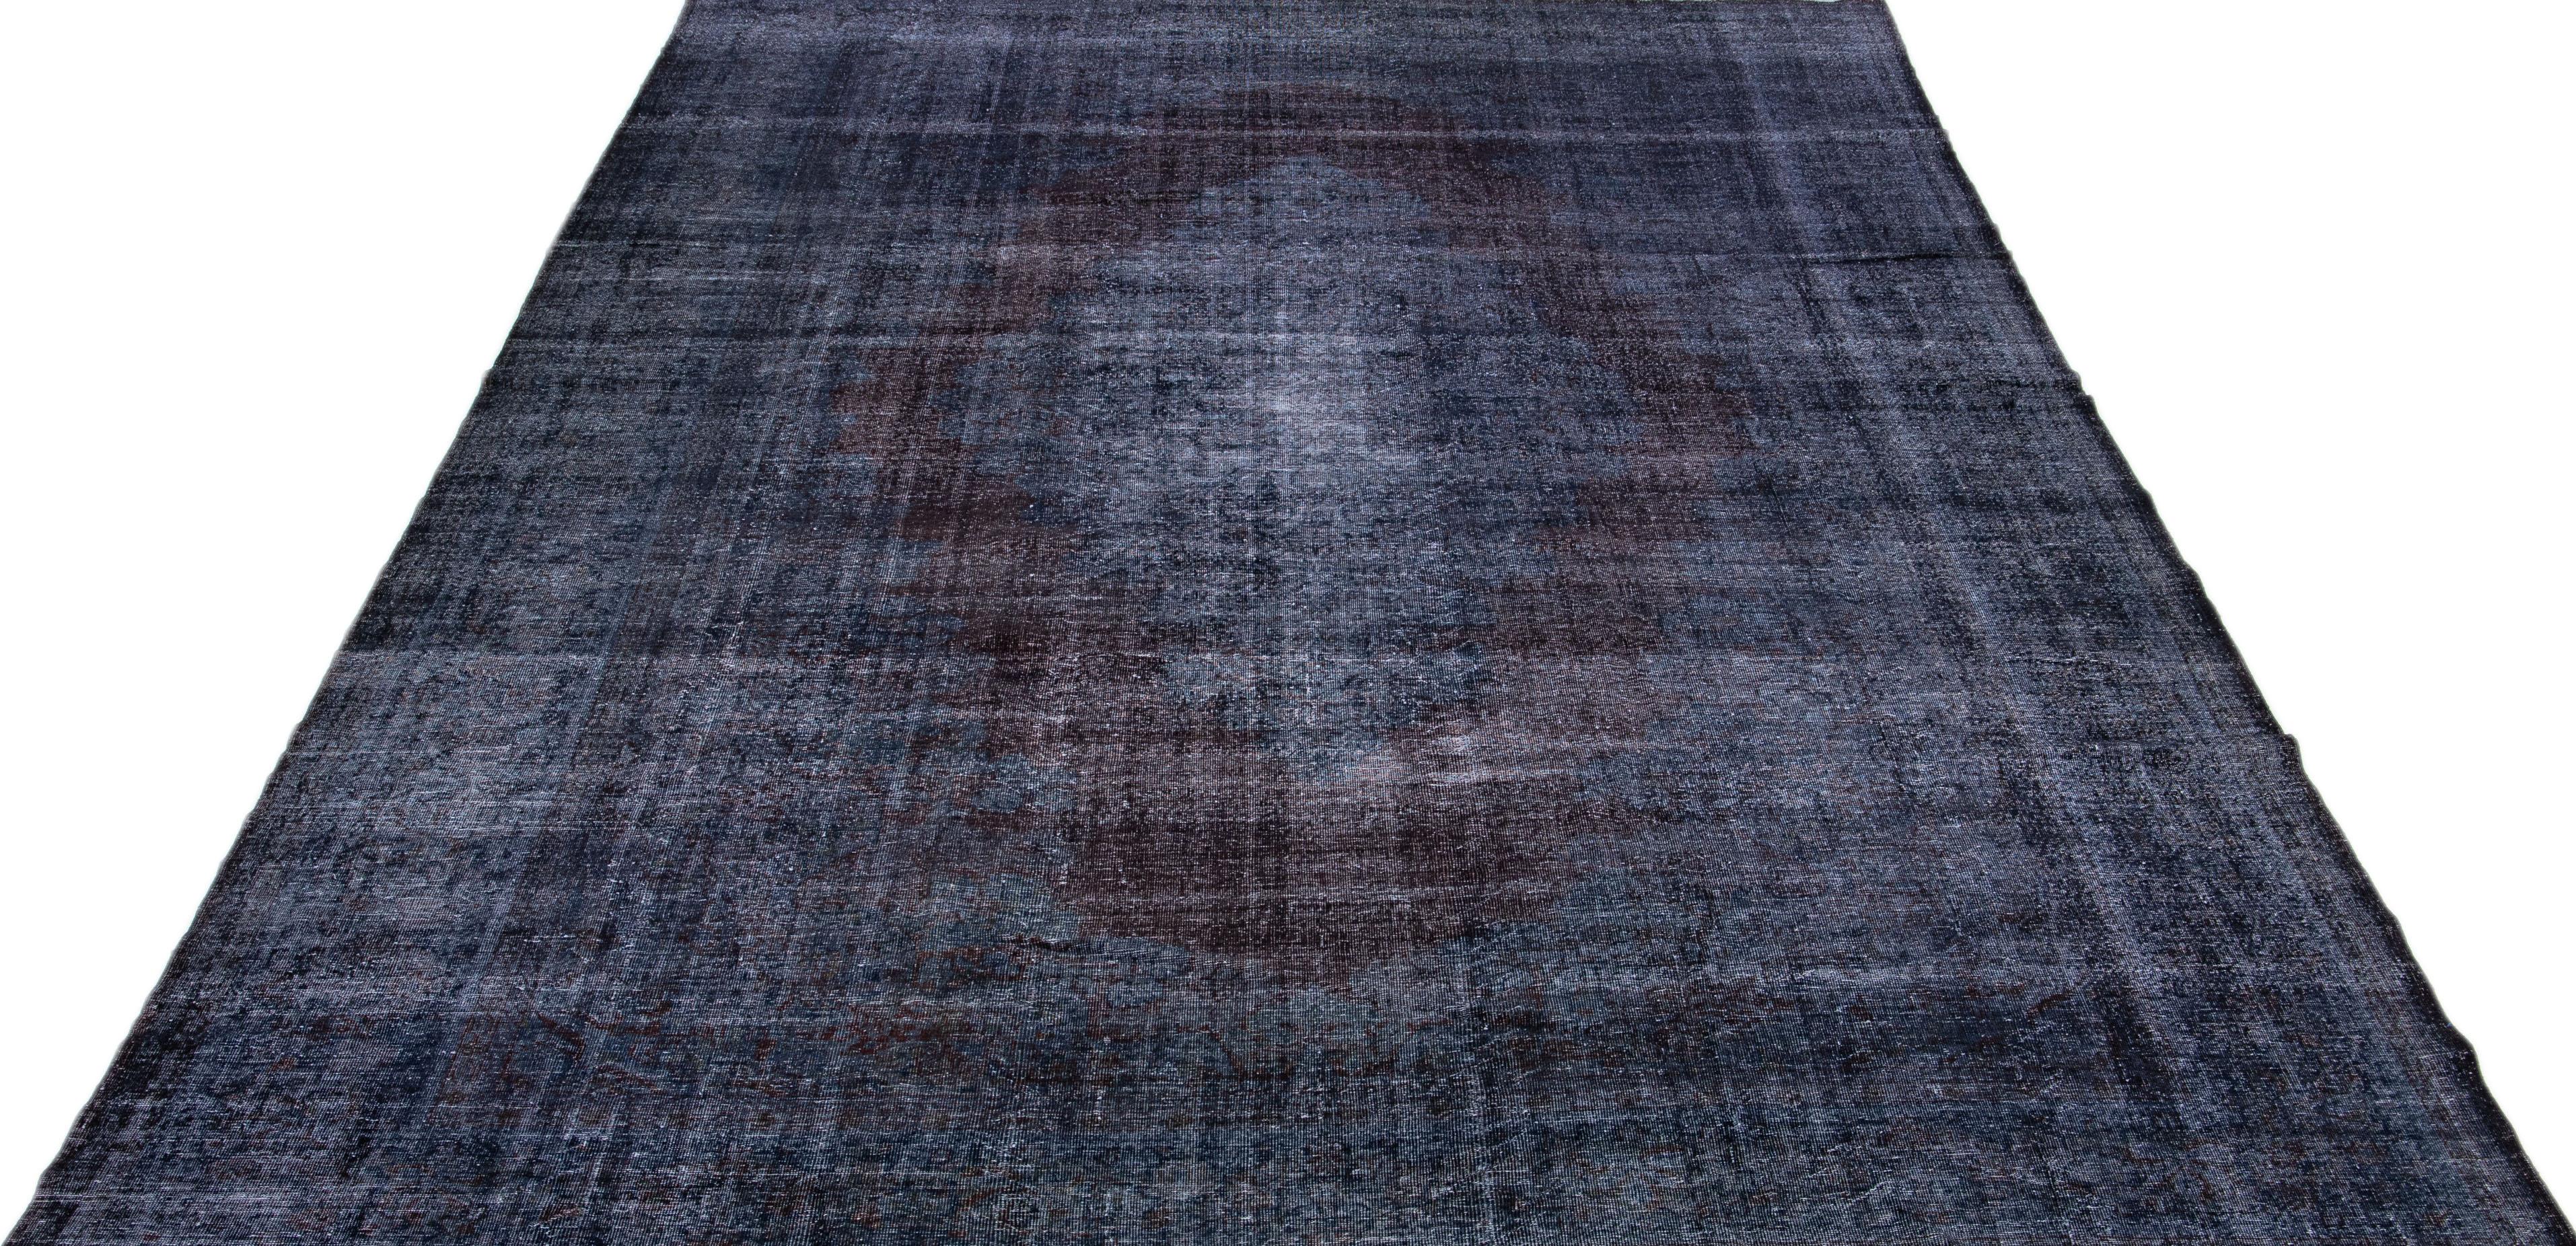 Beautiful Vintage Overdyed hand-knotted wool rug with a dark blue color field. This Turkish rug has brown accents in a gorgeous medallion design.

This rug measures: 11' x 16'8